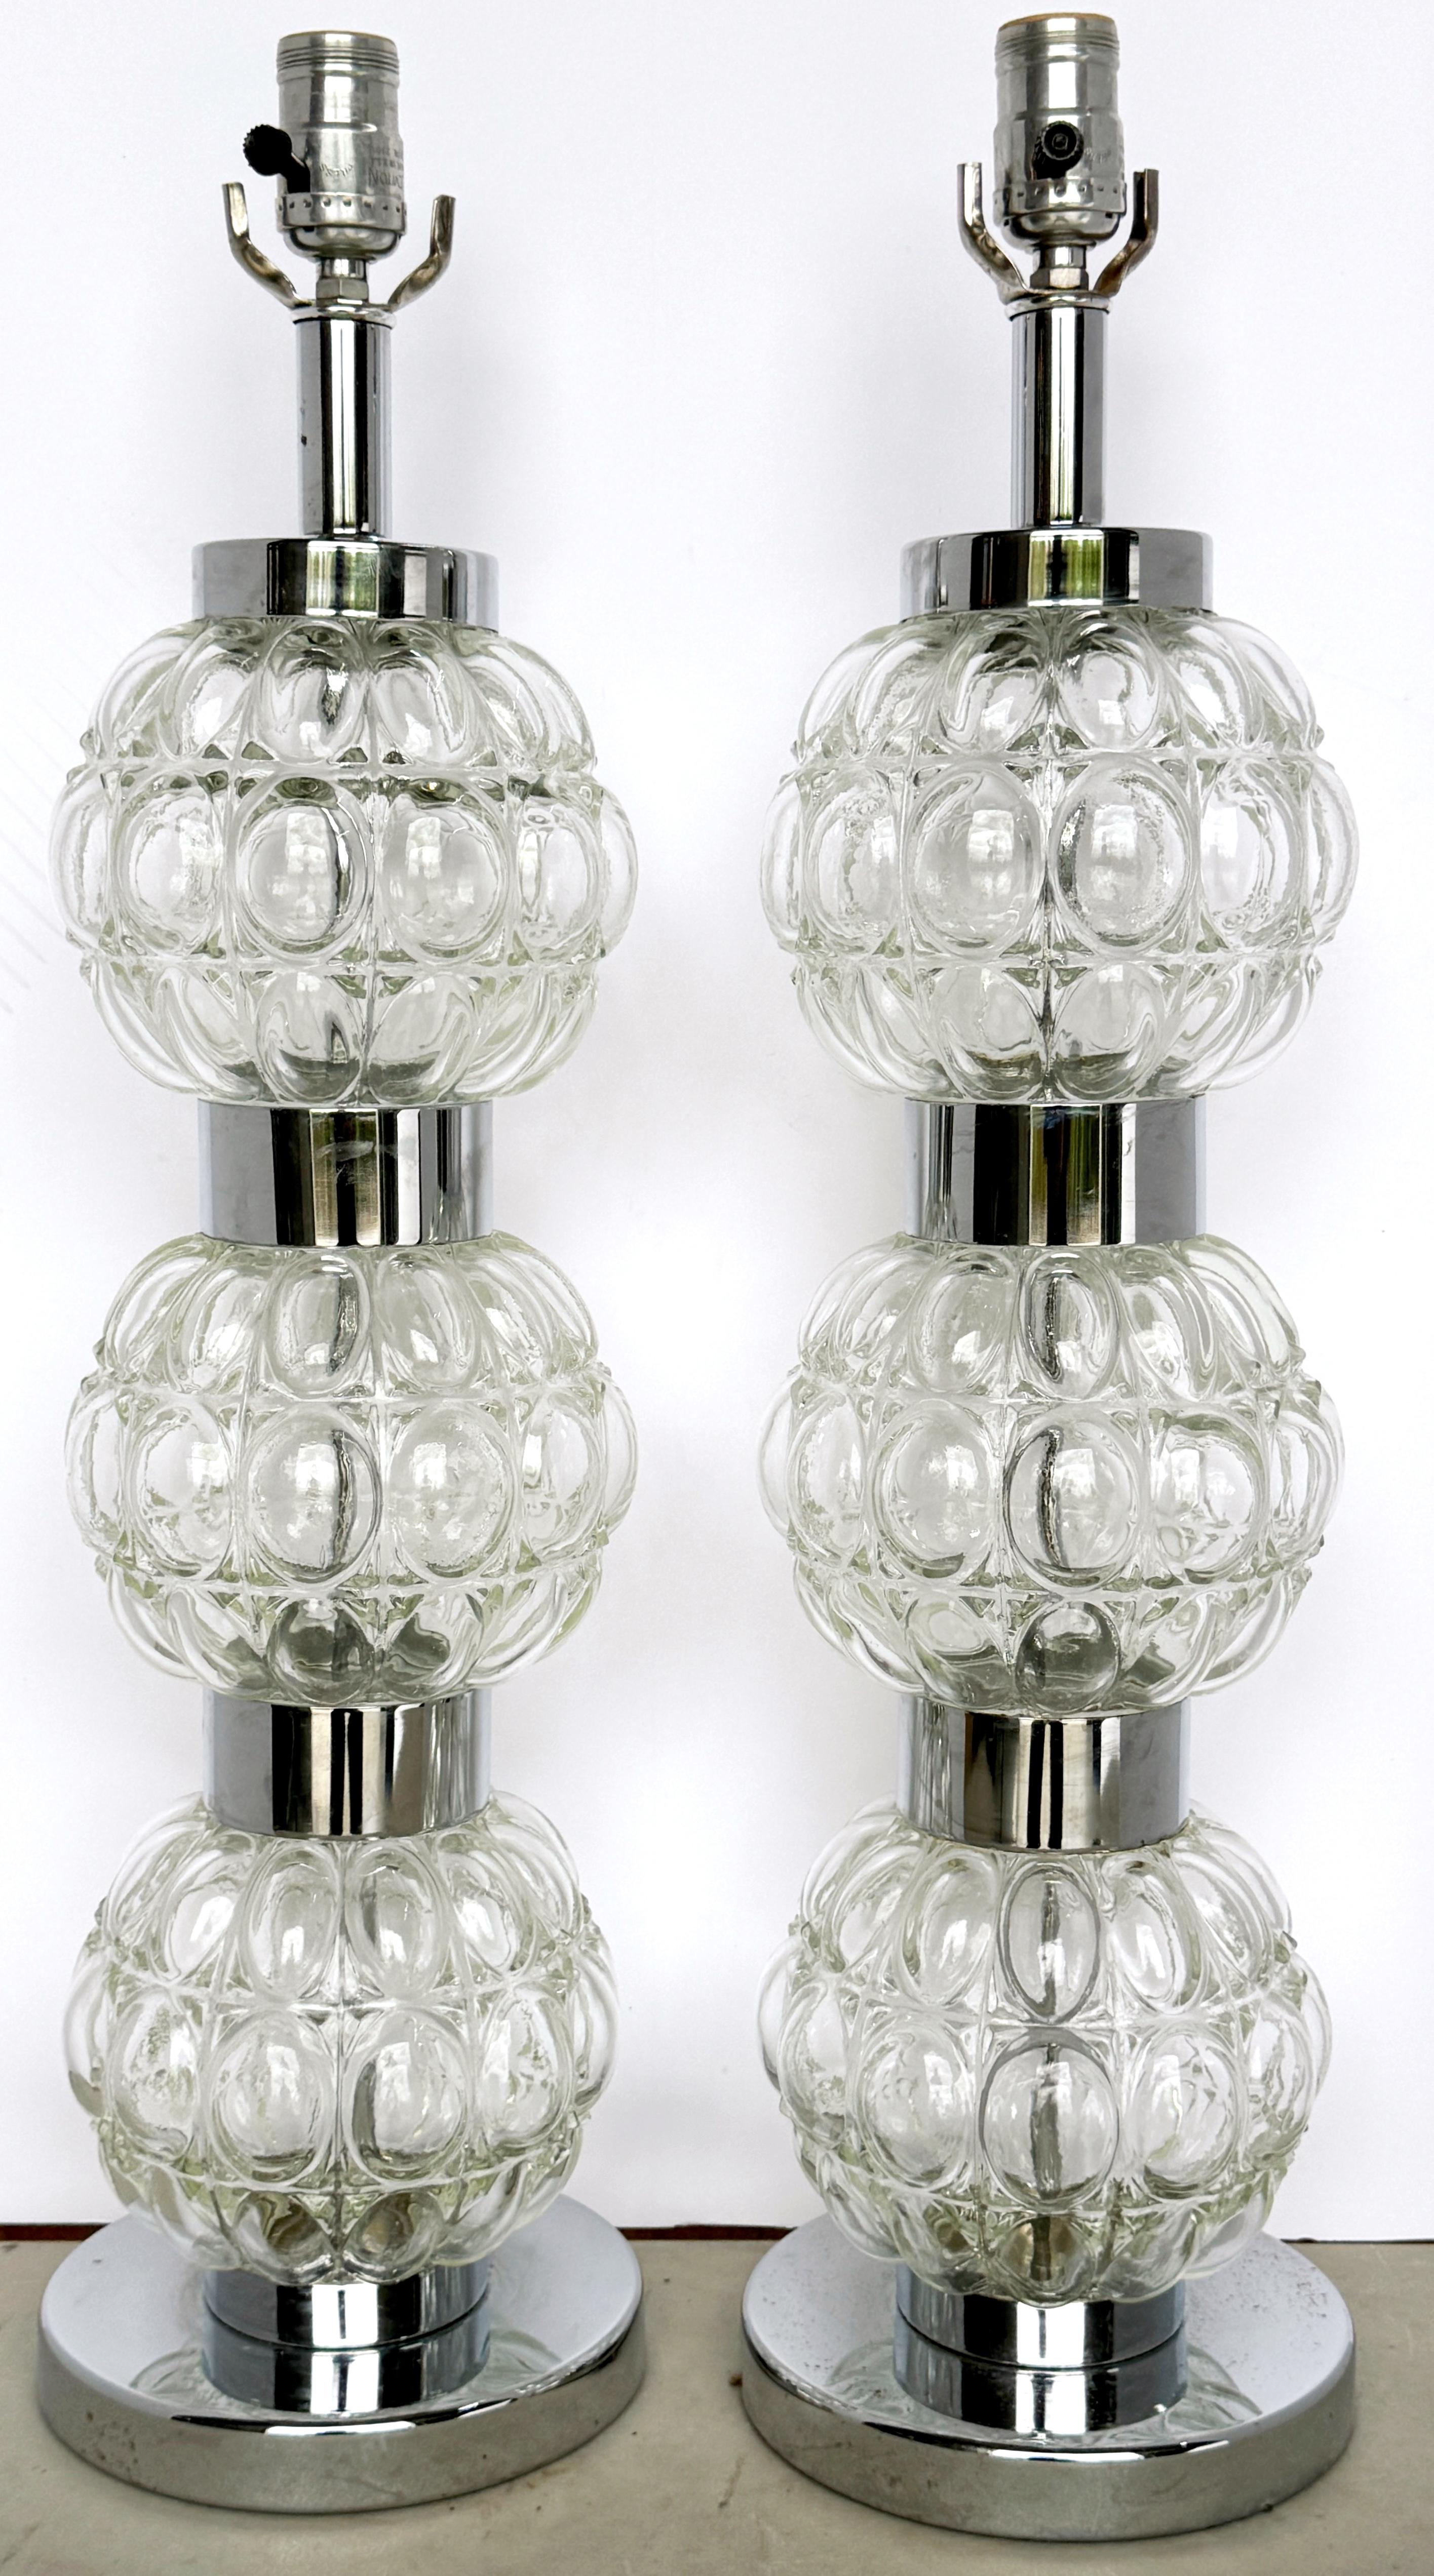 Pair of 1960s Italian MOD/ Space Age  Murano Glass Sphere Column Lamps 

We are please to offer this unique duo, a pair of 1960s Italian MOD/Space Age Murano glass sphere column lamps. These stunning pieces stand  23 inches in height to the top of